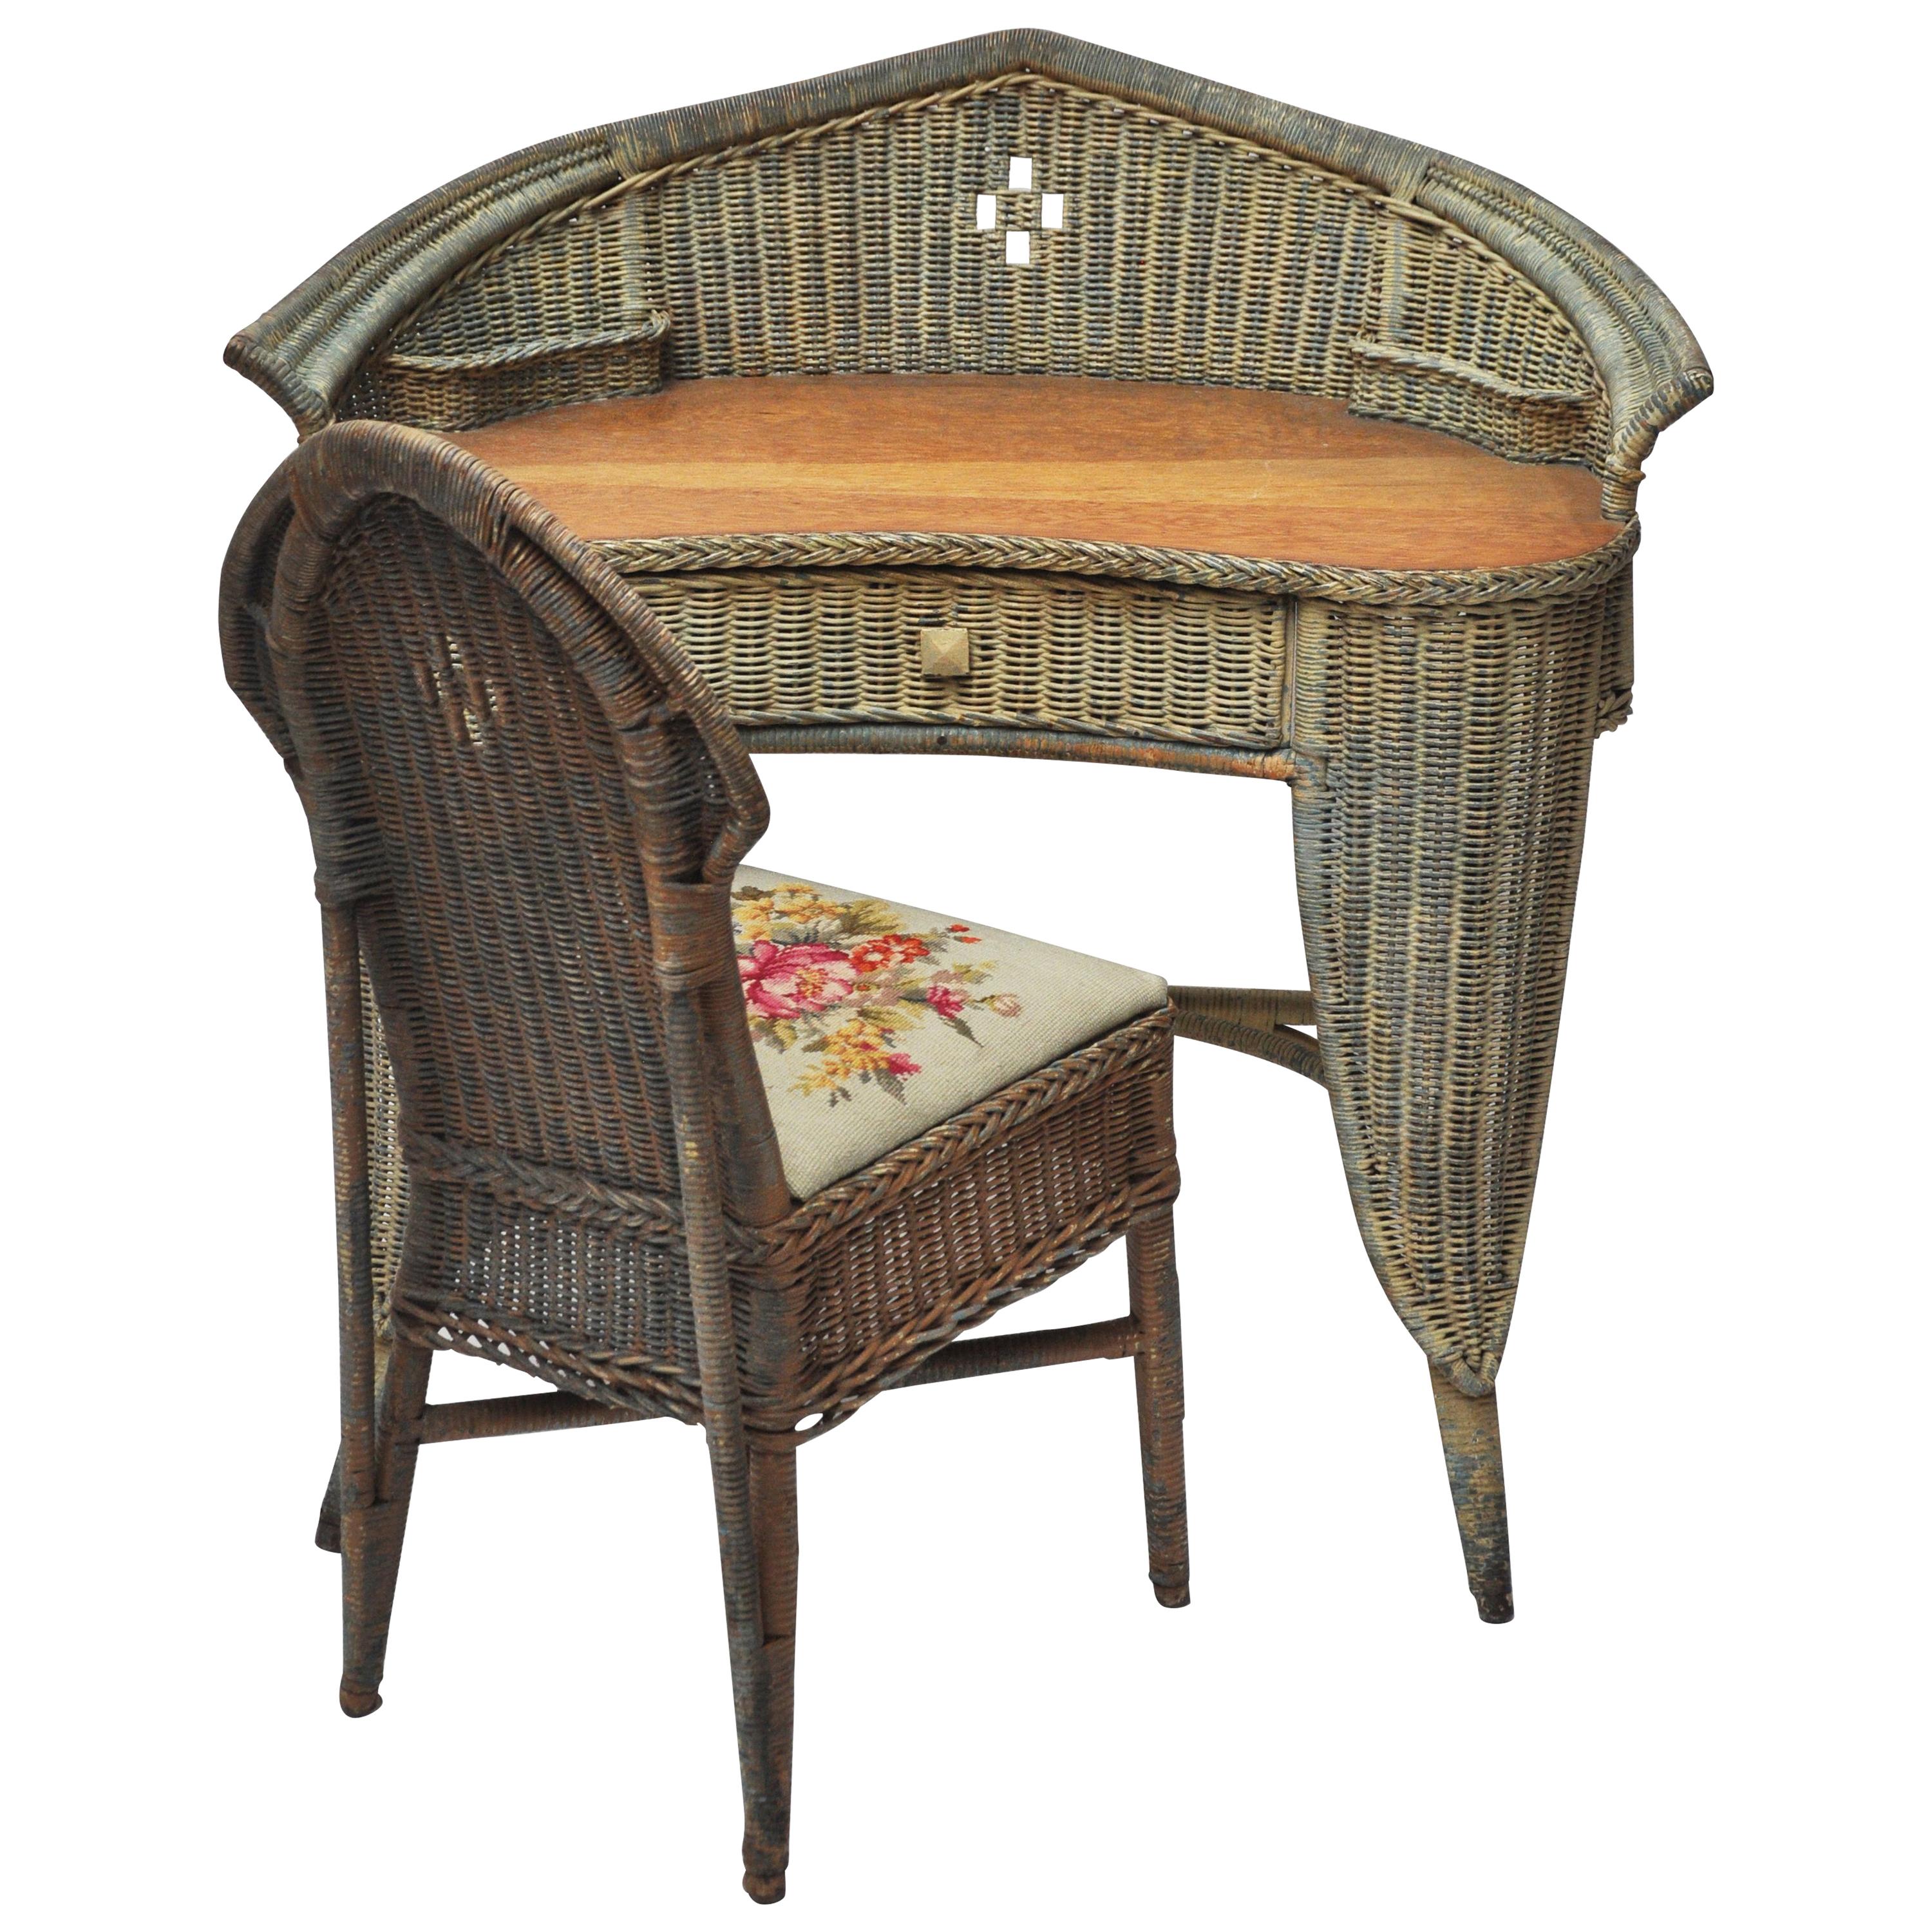 Wicker and Rattan Secretary Writing Desk with Matching Chair